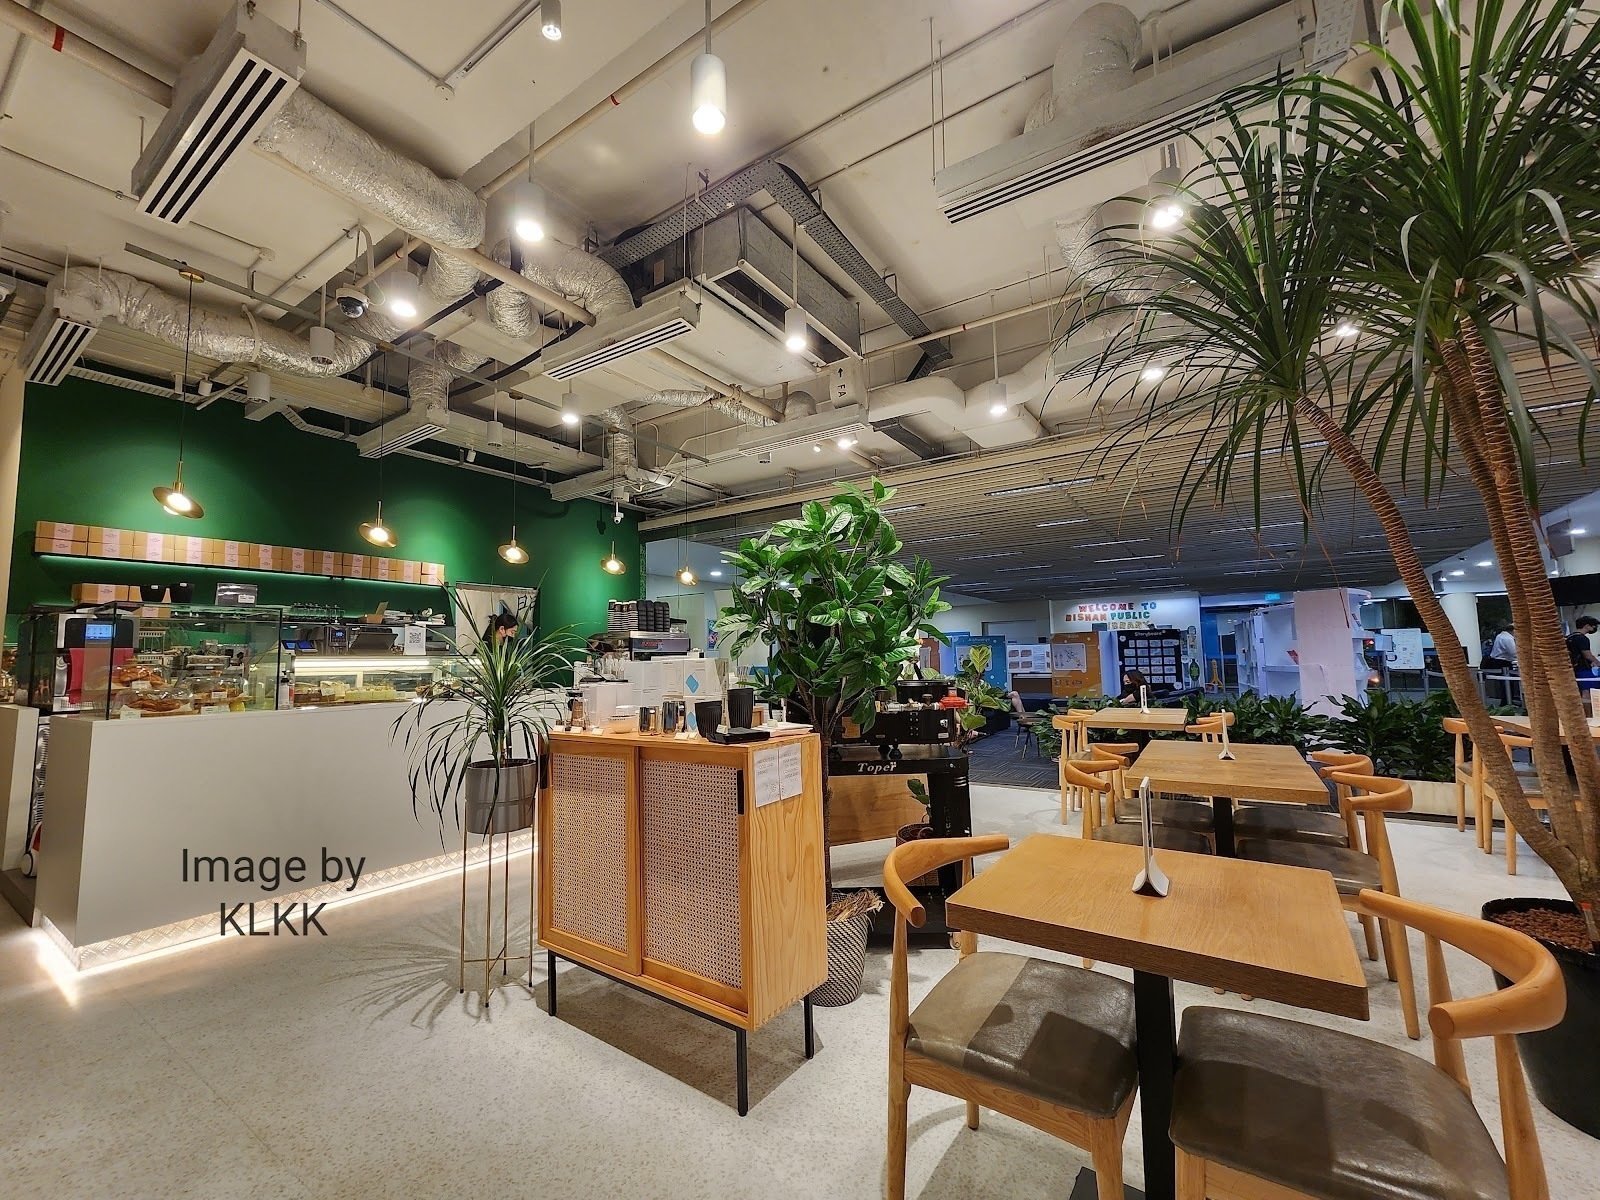 <span class="translation_missing" title="translation missing: en.meta.location_title, location_name: Kings Cart Coffee Bishan, city: Singapore">Location Title</span>